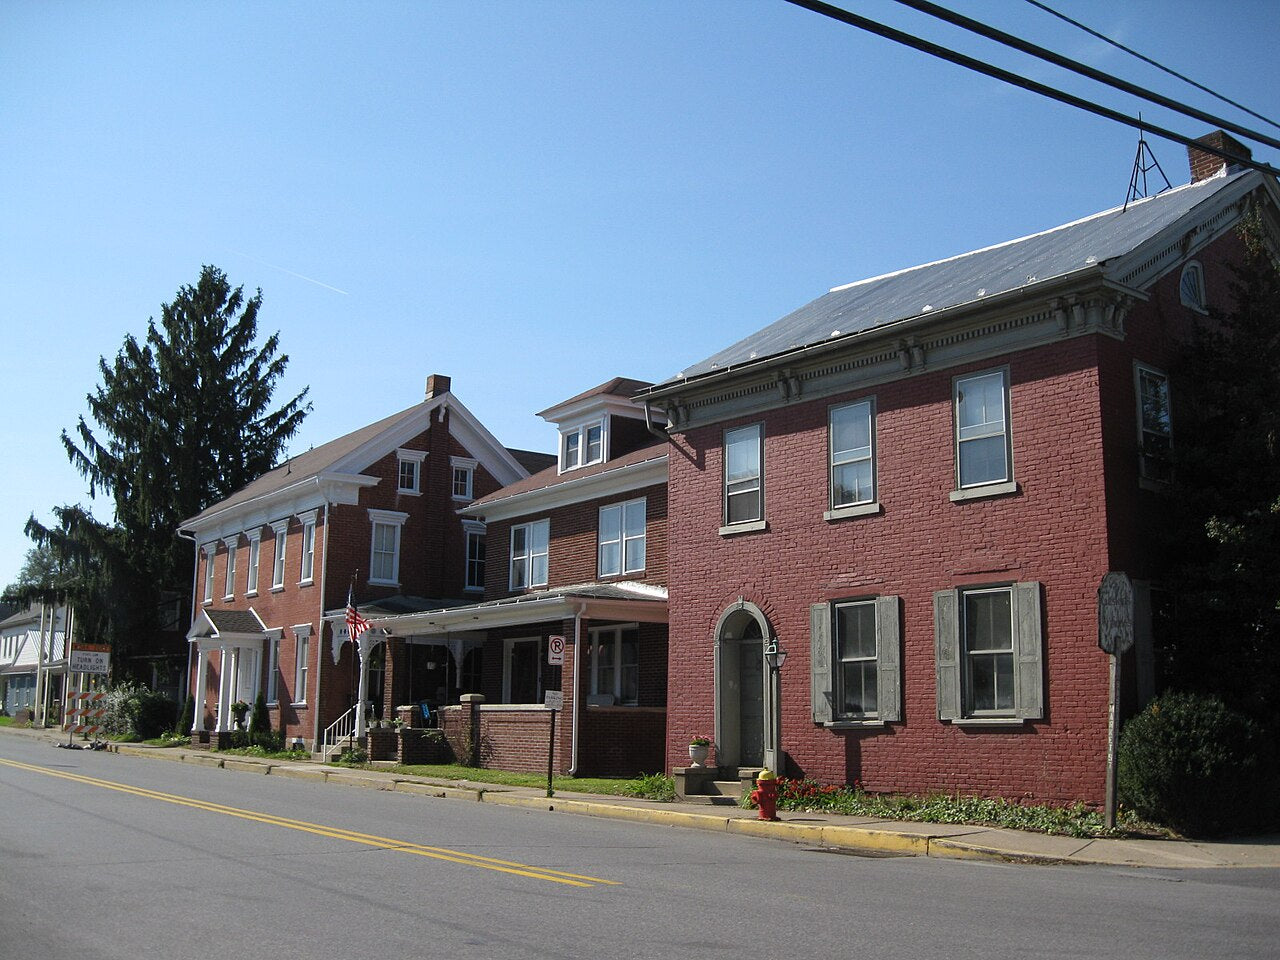 Haus and Hues in Selinsgrove